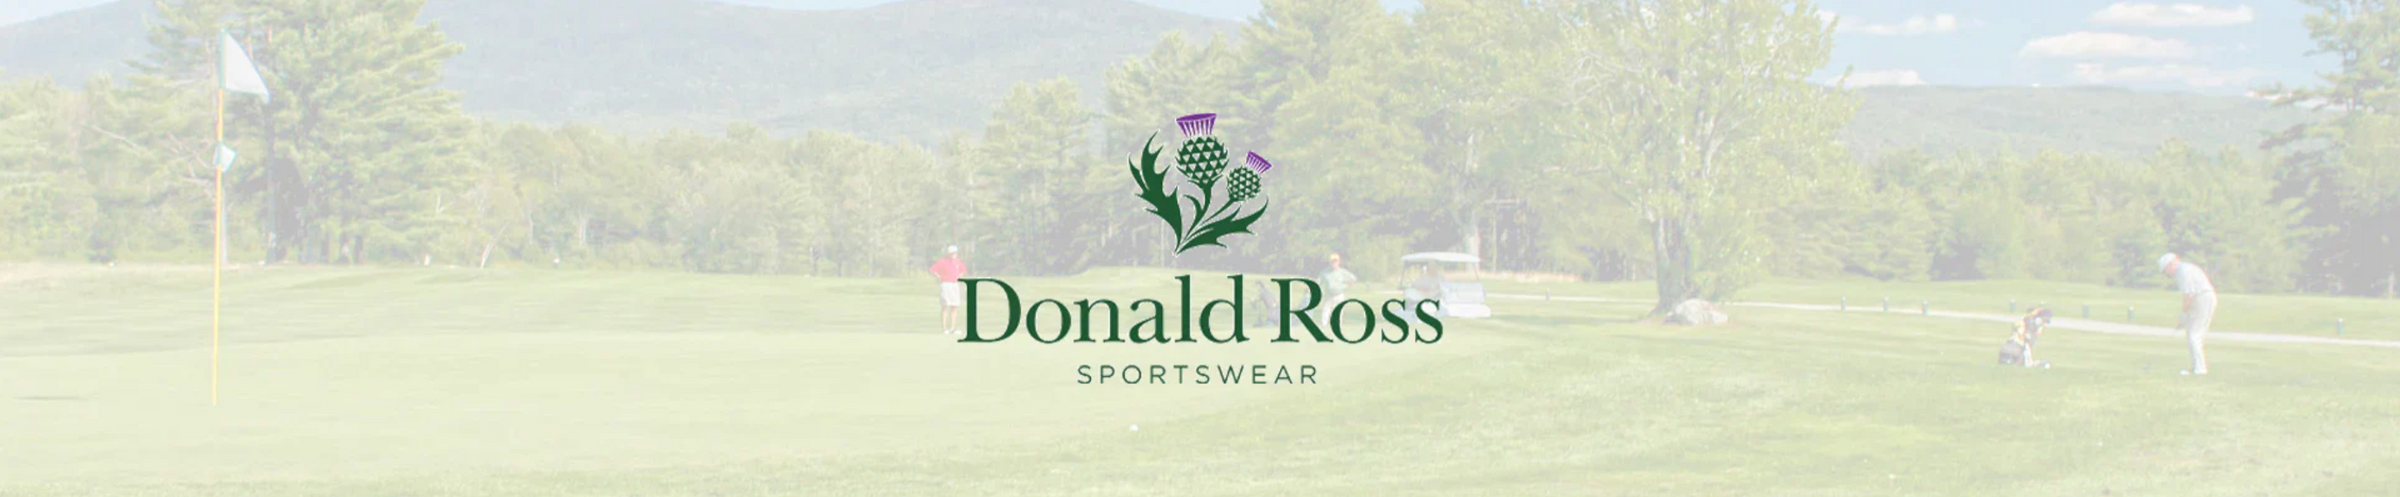 Donald Ross Collection Banner 